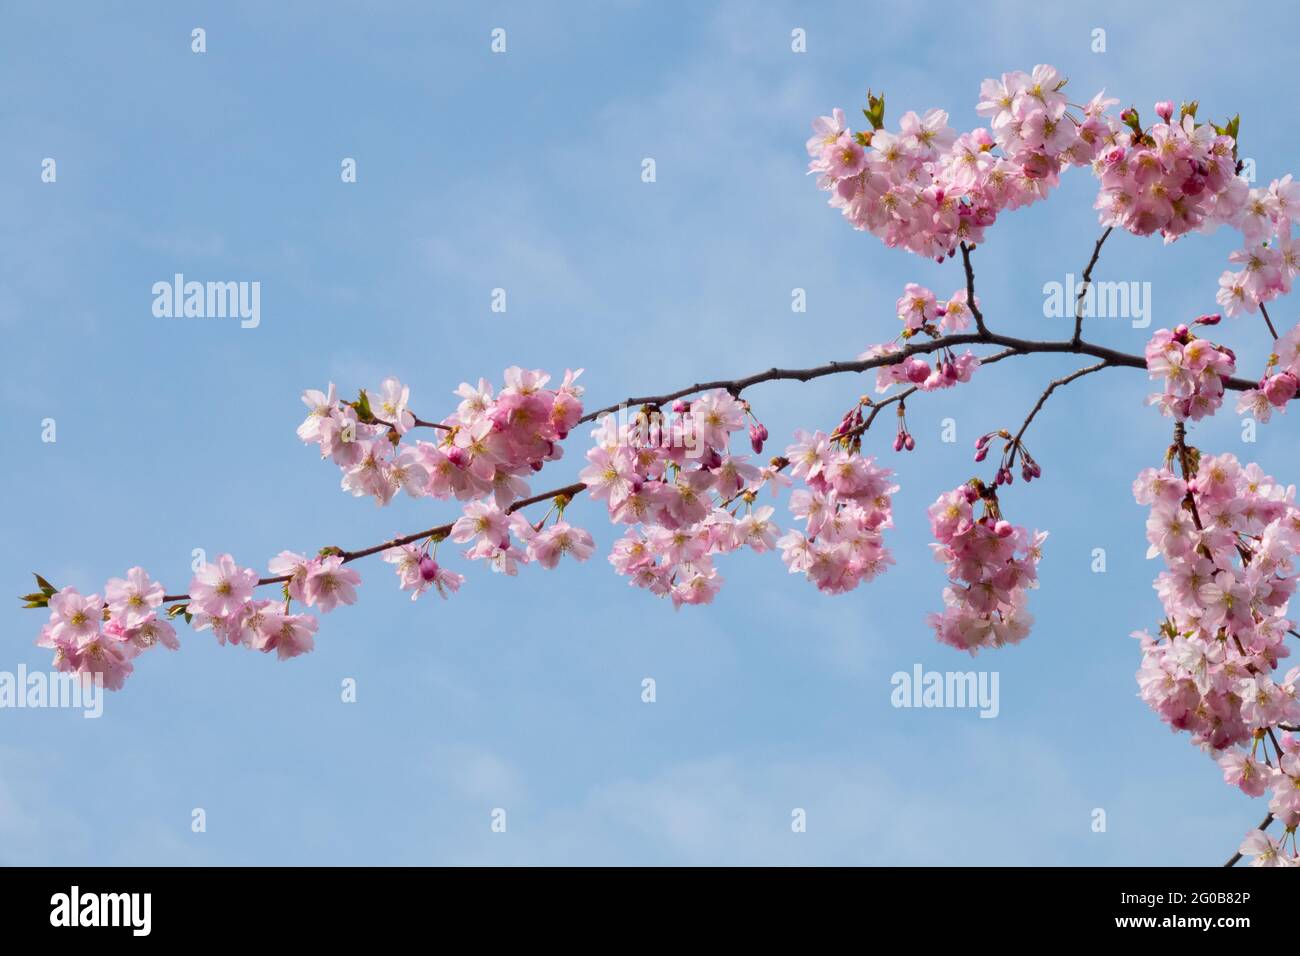 Prunus cherry tree branch blooming, pink blossoms Stock Photo